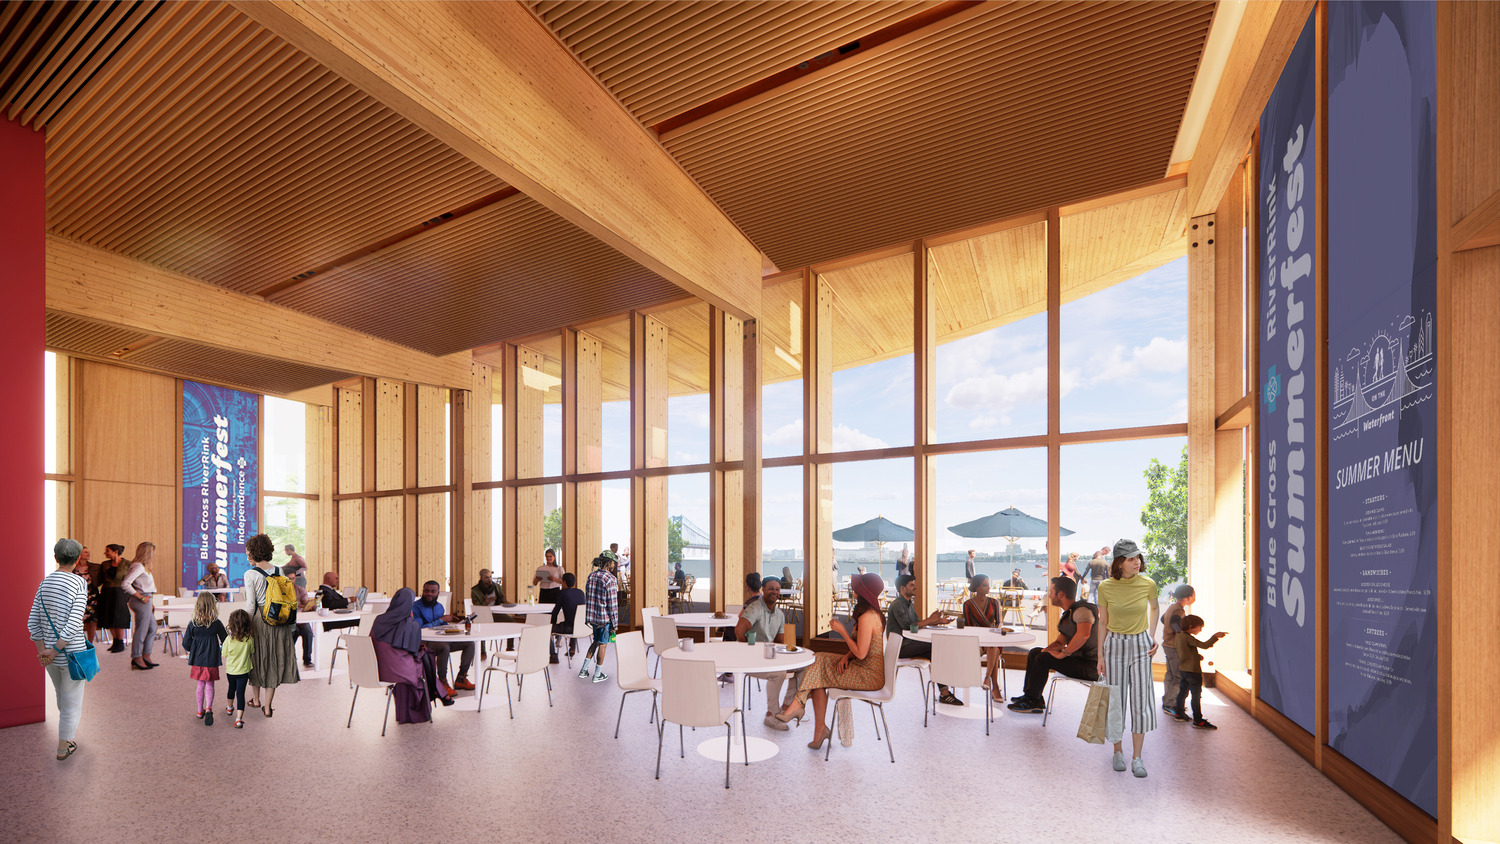 <p>The café will serve as both a public-facing amenity and a landmark connection to the park and waterfront.&nbsp;<br /><br><small>&copy; KieranTimberlake</small></p>